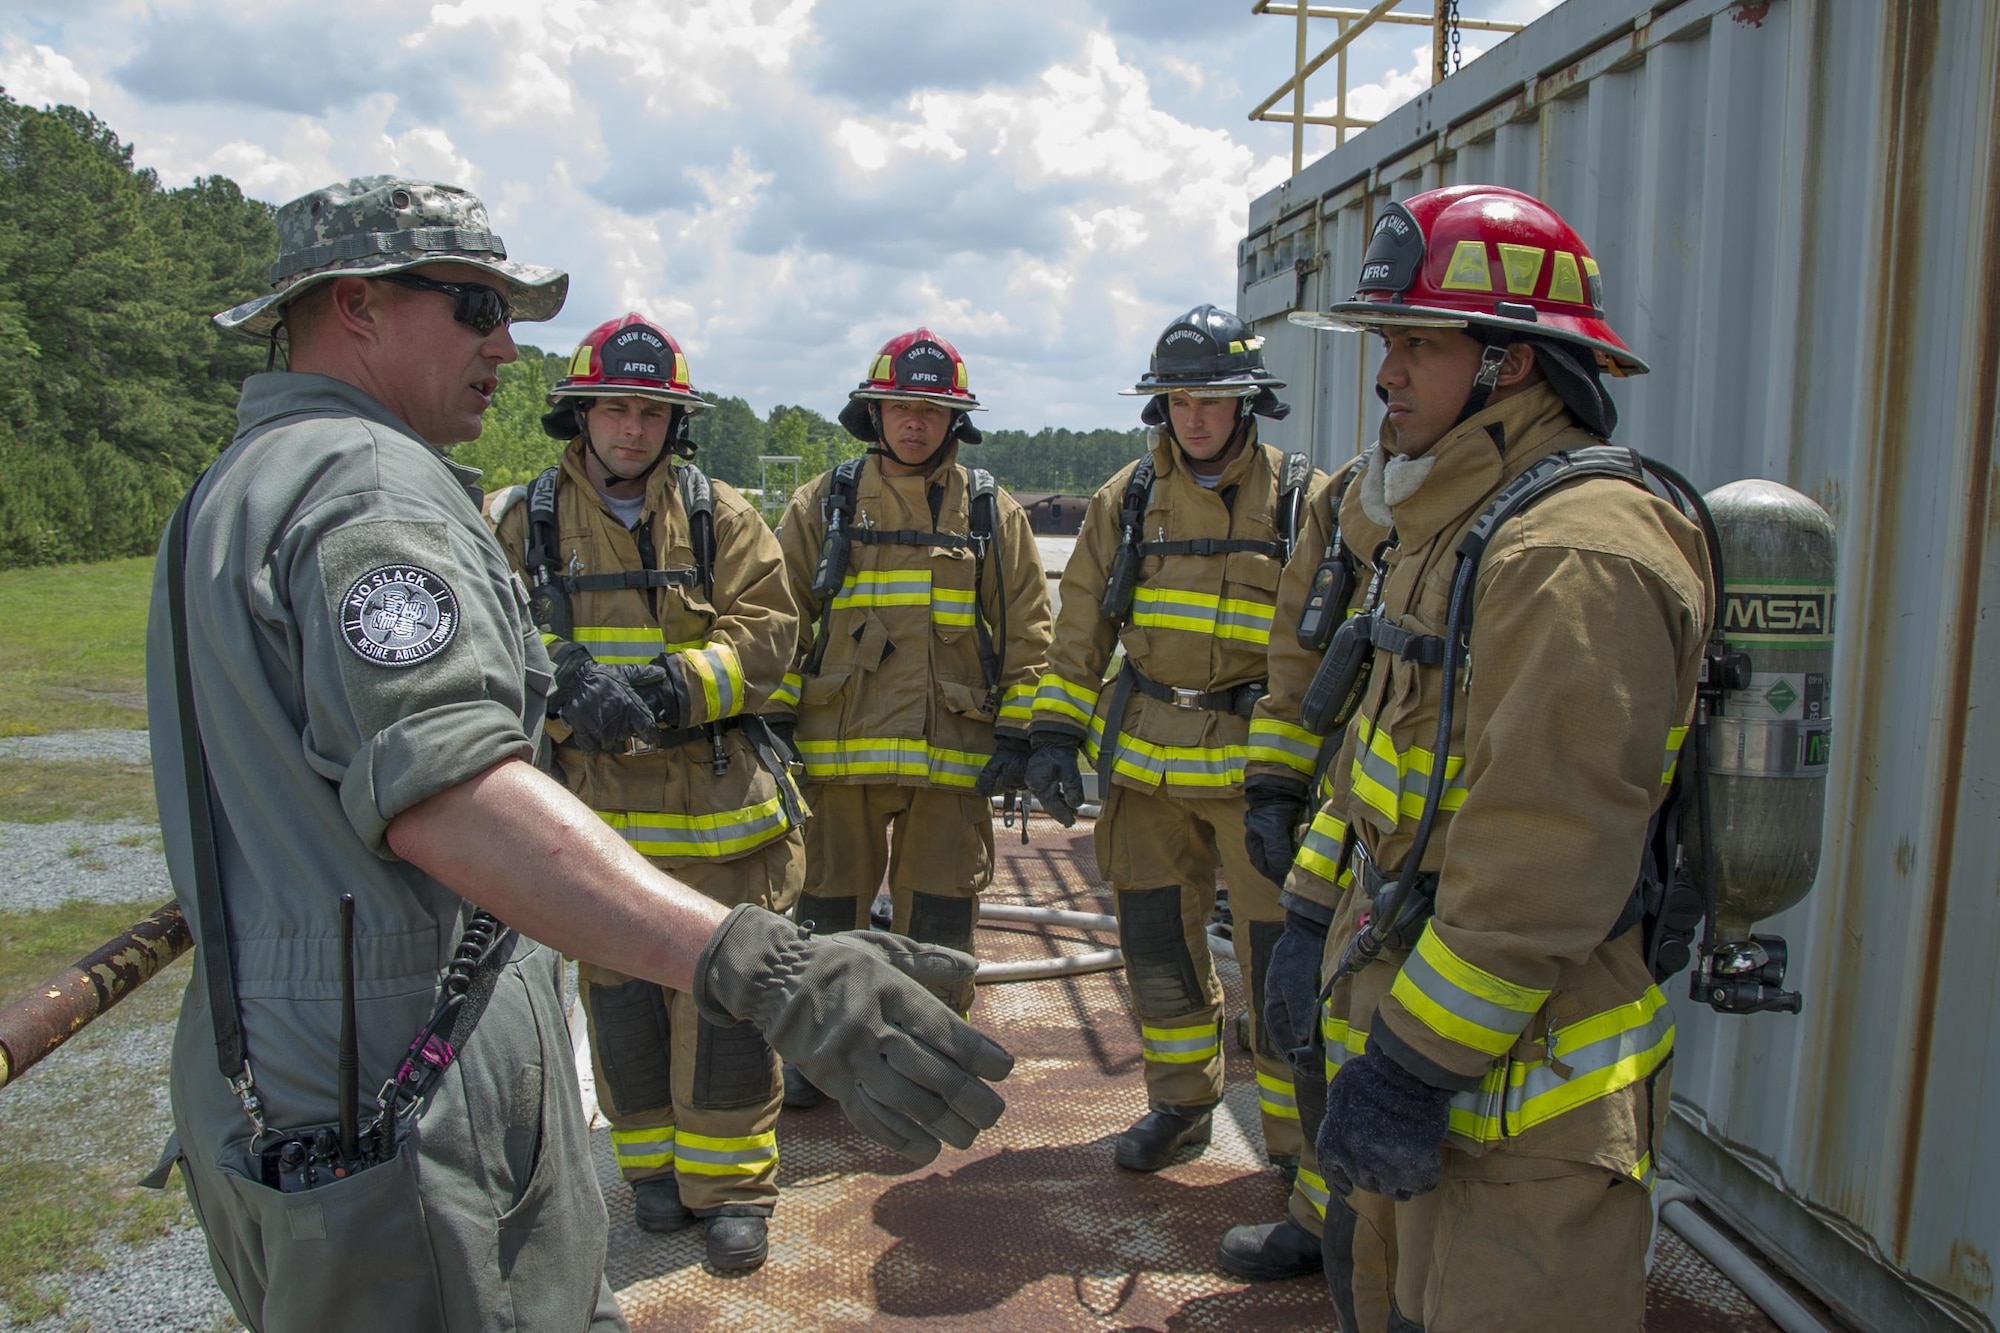 U.S. Air Force Master Sgt. Nick Ward, of Chicago, Illinois, a member of the 434th Civil Engineer Squadron, Grissom Air Reserve Base, explains rescue techniques using a hoseline during the first-ever Air Force Reserve Command Firefighter Rescue and Survival Course at Dobbins Air Reserve Base, Ga., April 18, 2017. Twenty Citizen Airmen participated in the intense 50-hour course held at the 622nd Civil Engineer Group expeditionary combat support-training certification center, which focused on a Rapid Intervention Crew, or RIC. The RIC is a dedicated and specially trained group of firefighters whose responsibilities include safely evacuating a distressed firefighter from a structure. (U.S. Air Force photo by Master Sgt. Theanne K. Herrmann)